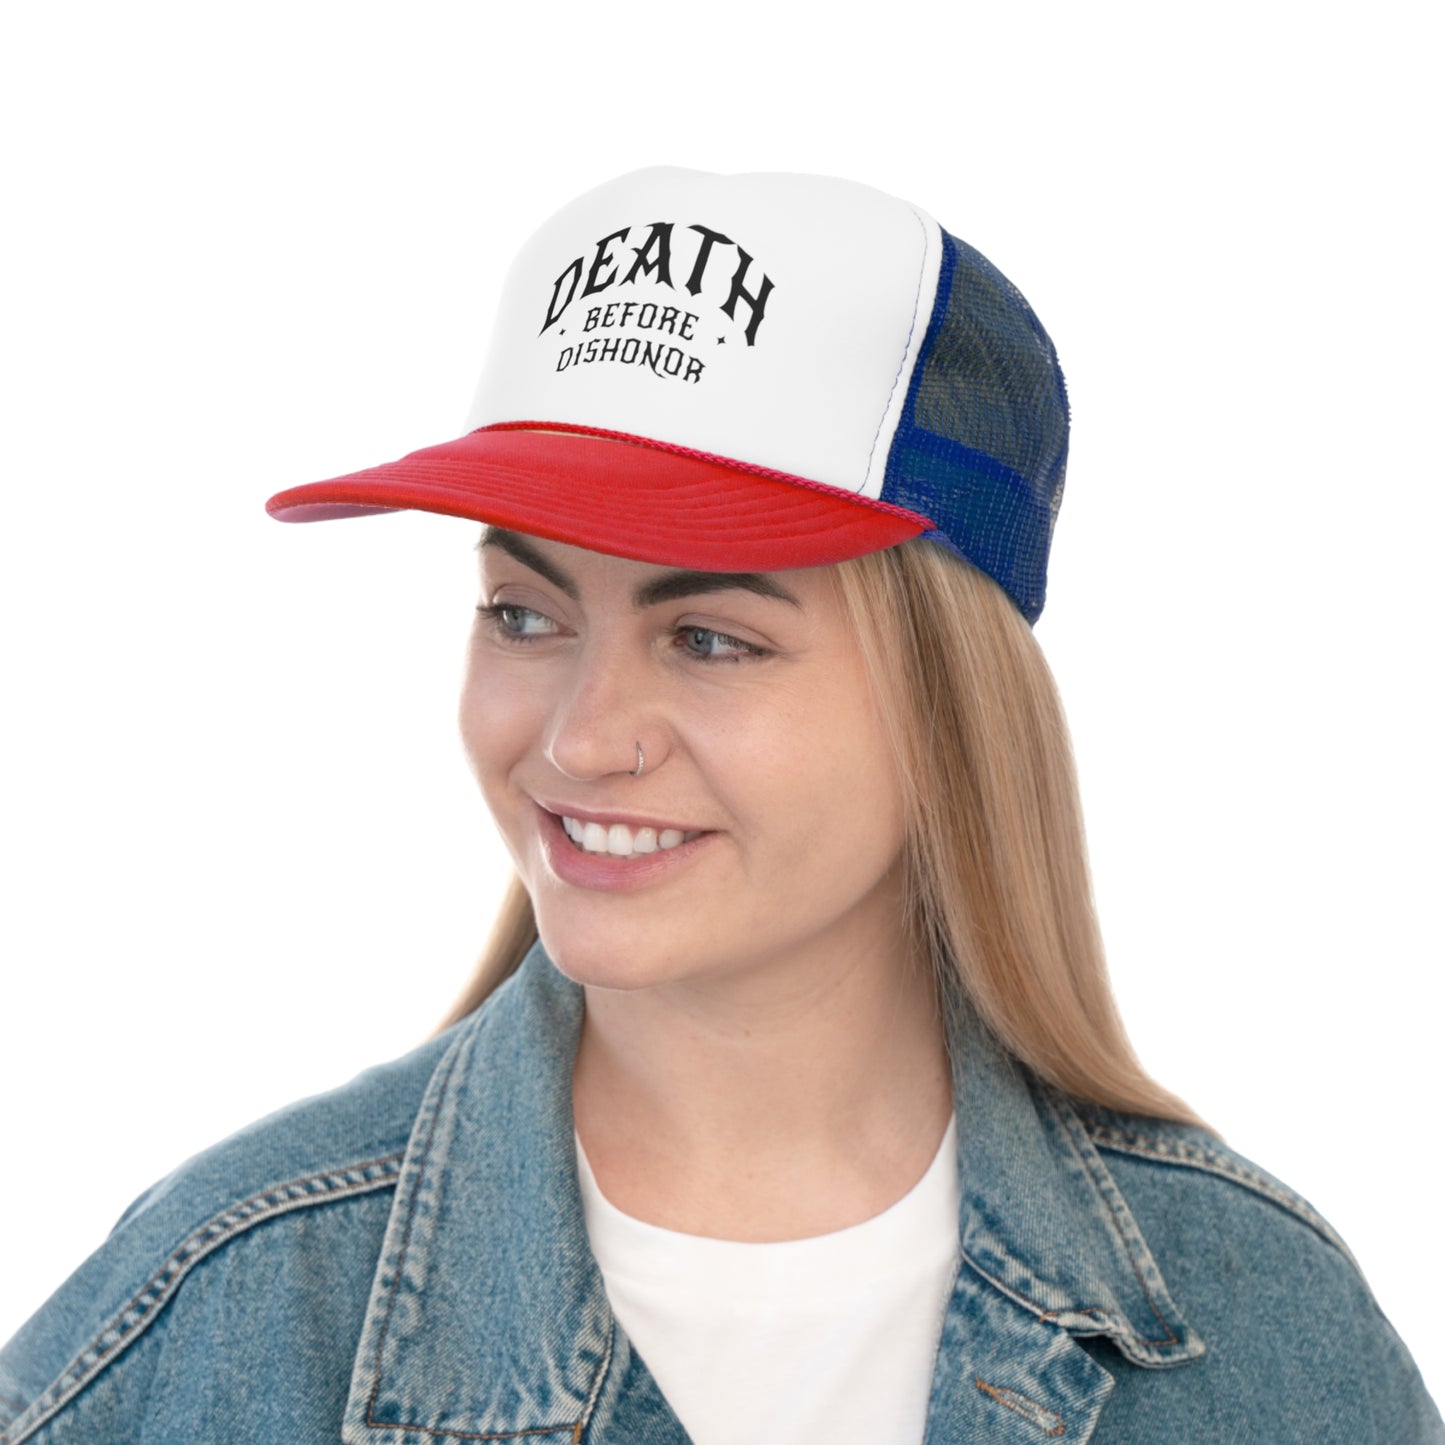 Death before dishonor hat